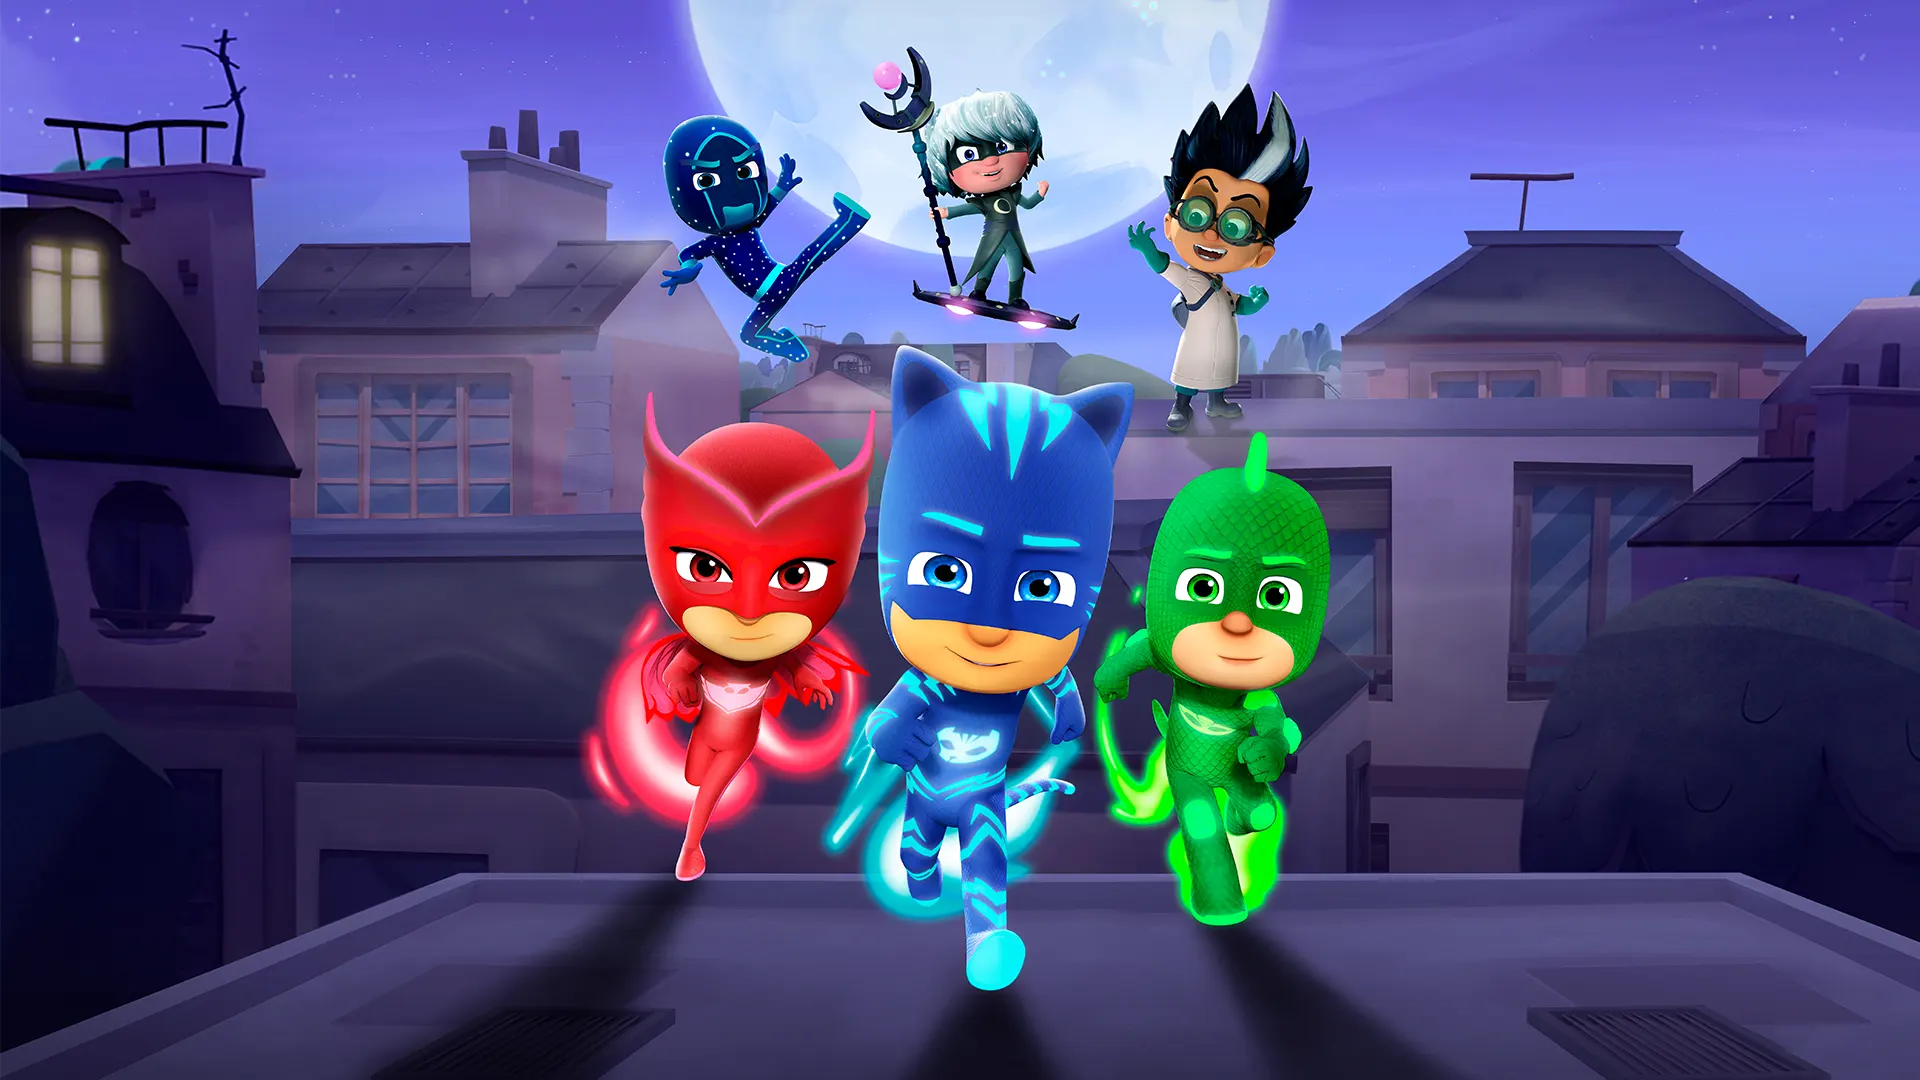 https://outrightgames.com/wp-content/uploads/2022/08/PJ-masks-heroes-of-the-night-key-art-1.webp